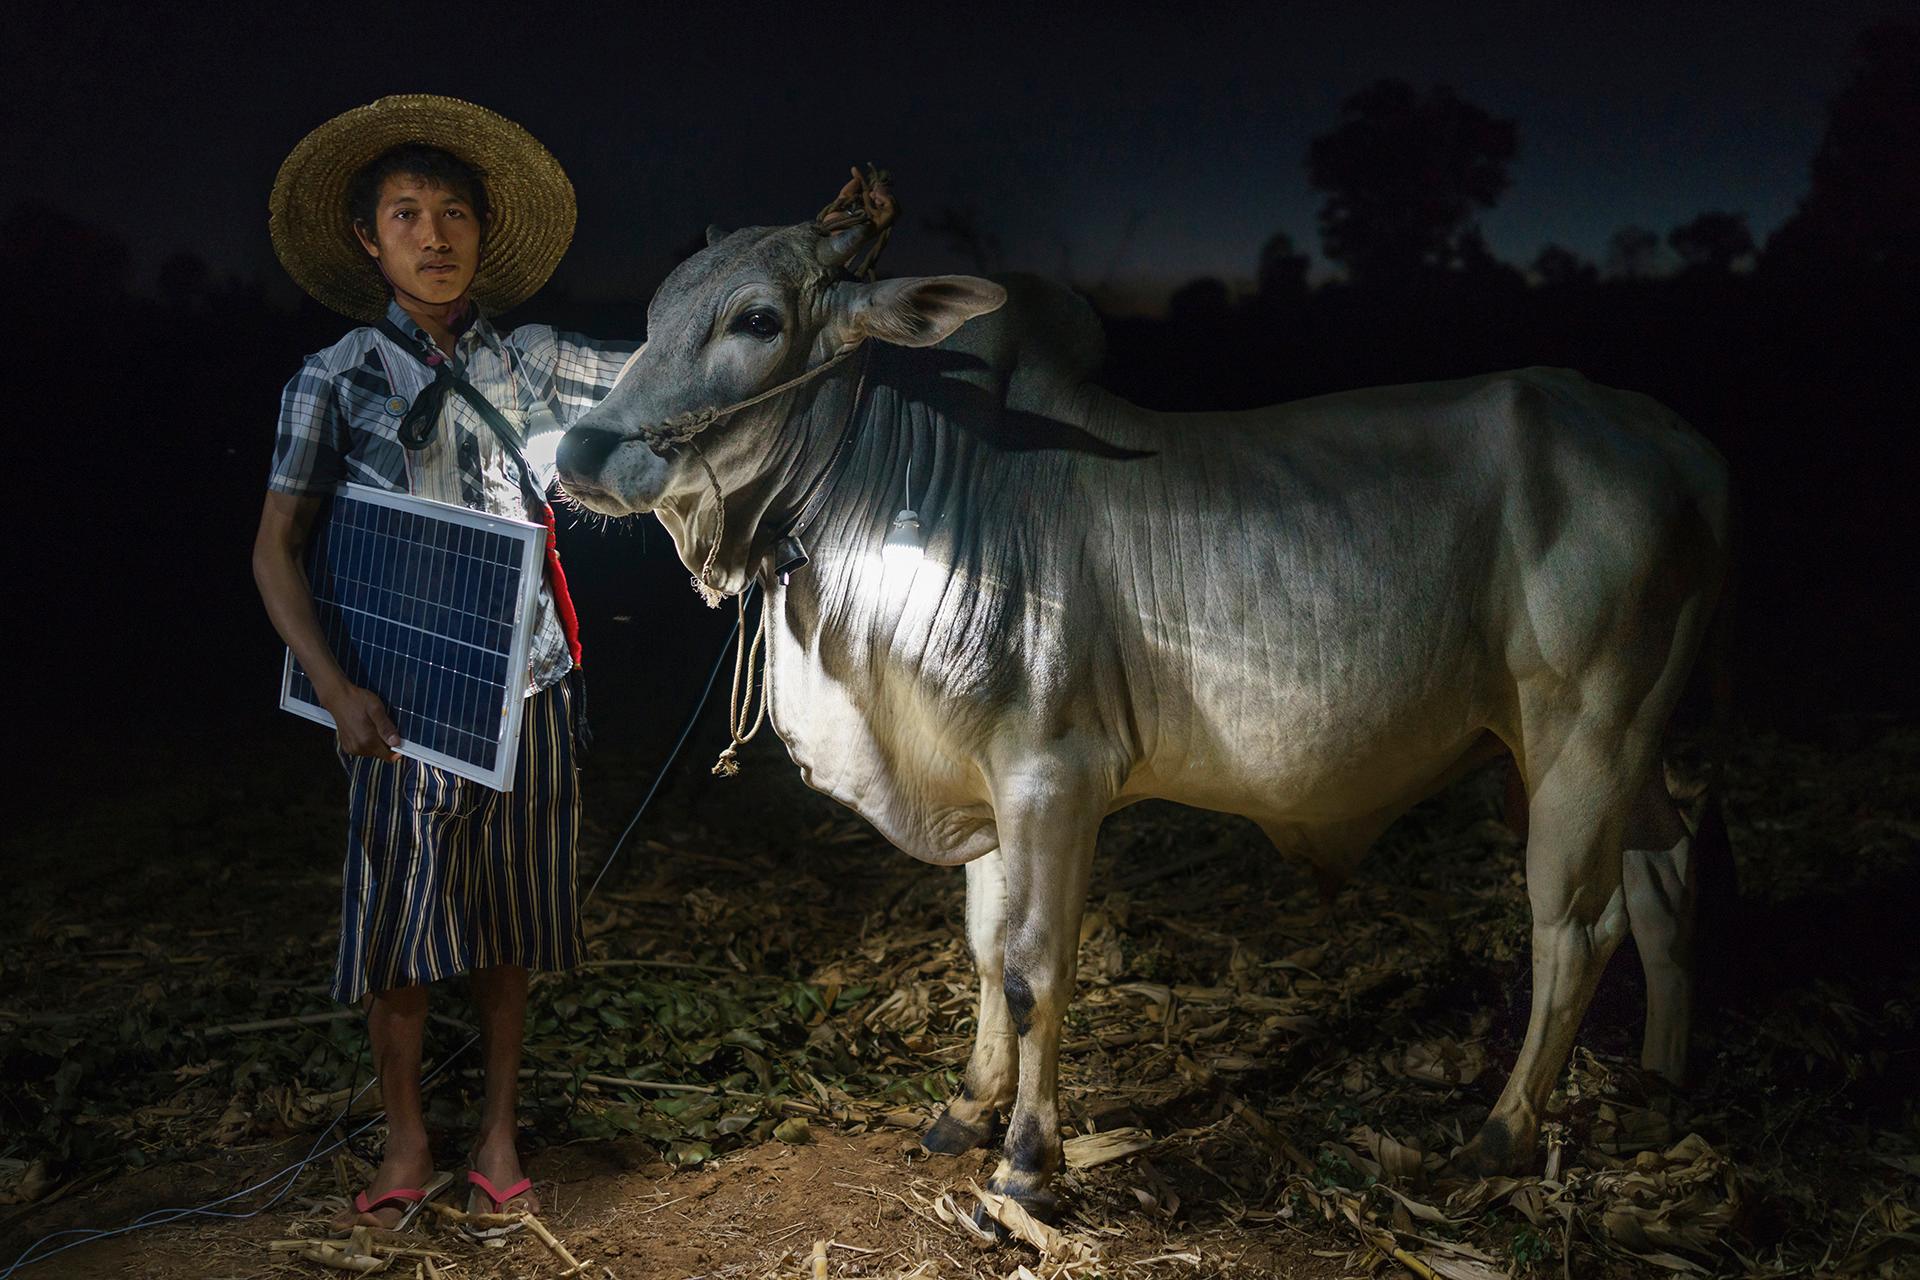 Mg Ko, 20 years old. A Shan farmer with his cow in Lui Pan Sone Village. Kayah State. Myanma. Foto: Ruben Salgado Escudero, Spain, SHORTLIST, Portraiture, Professional Competition, 2015 Sony World Photography Awards